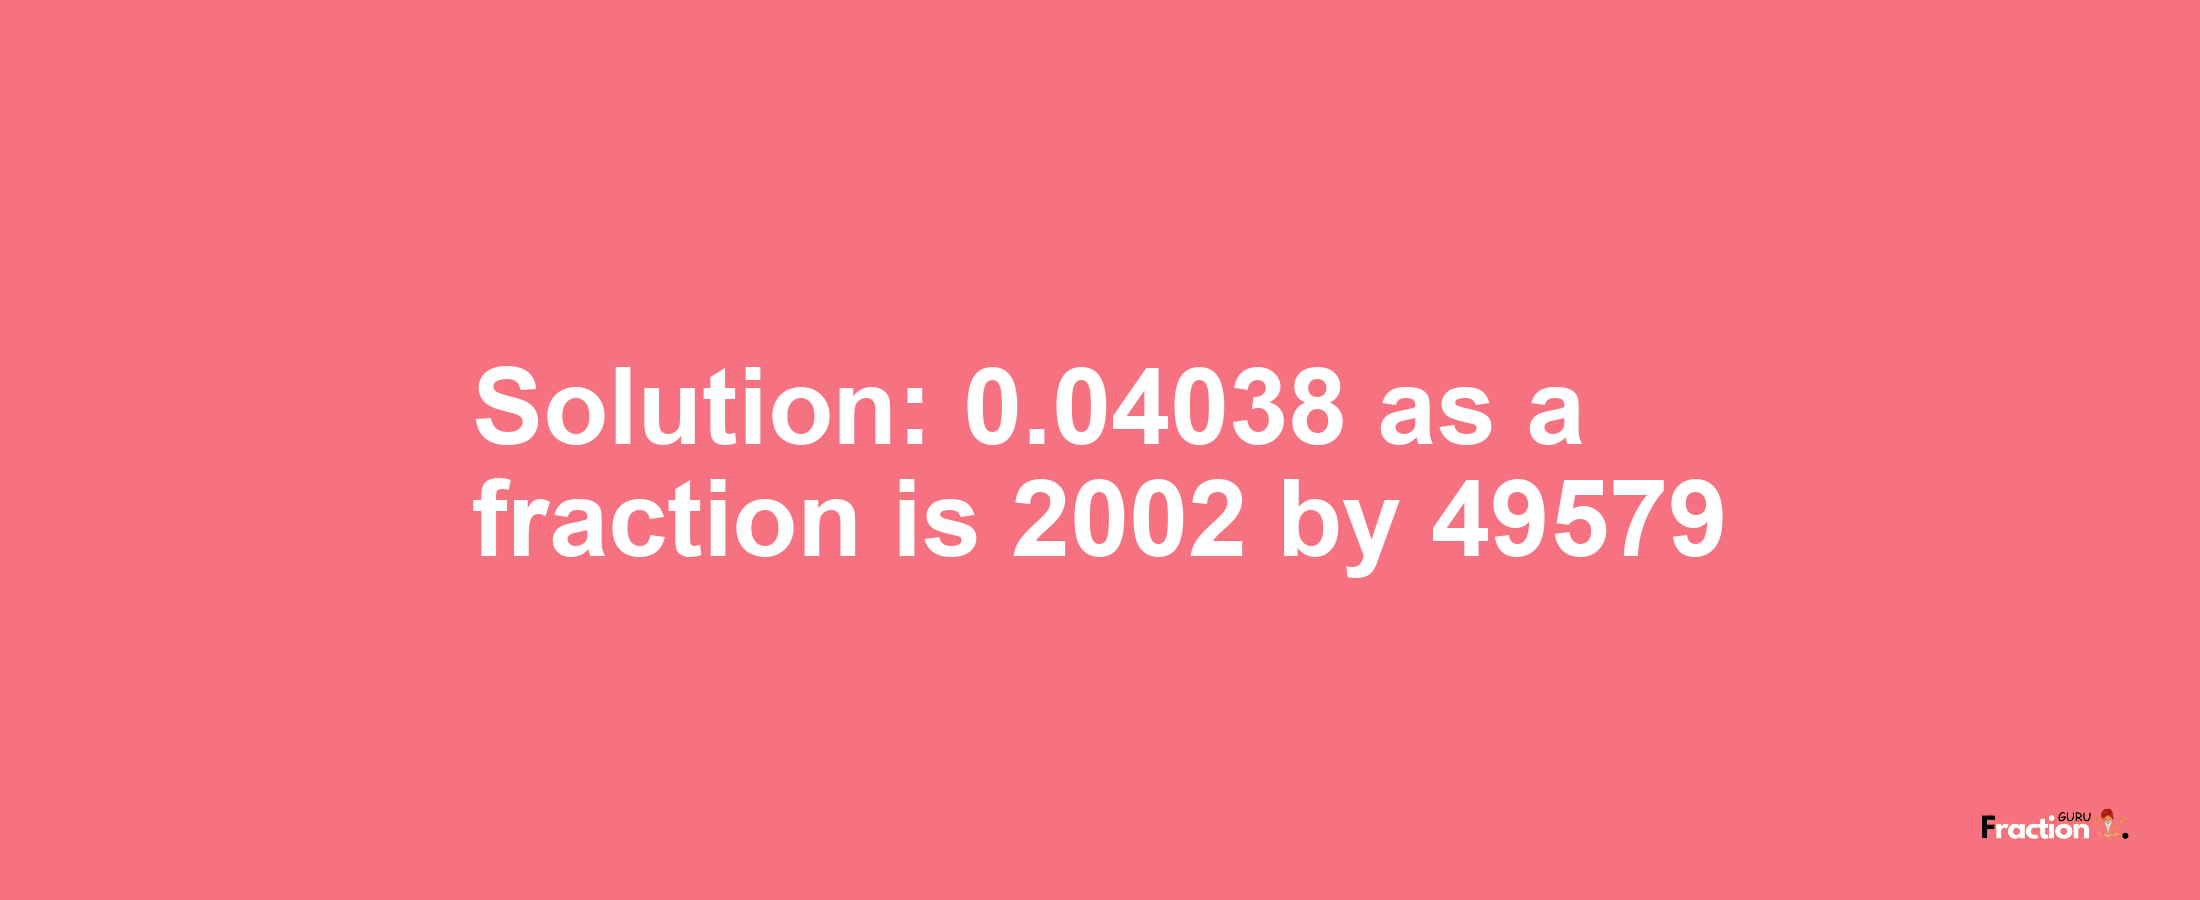 Solution:0.04038 as a fraction is 2002/49579